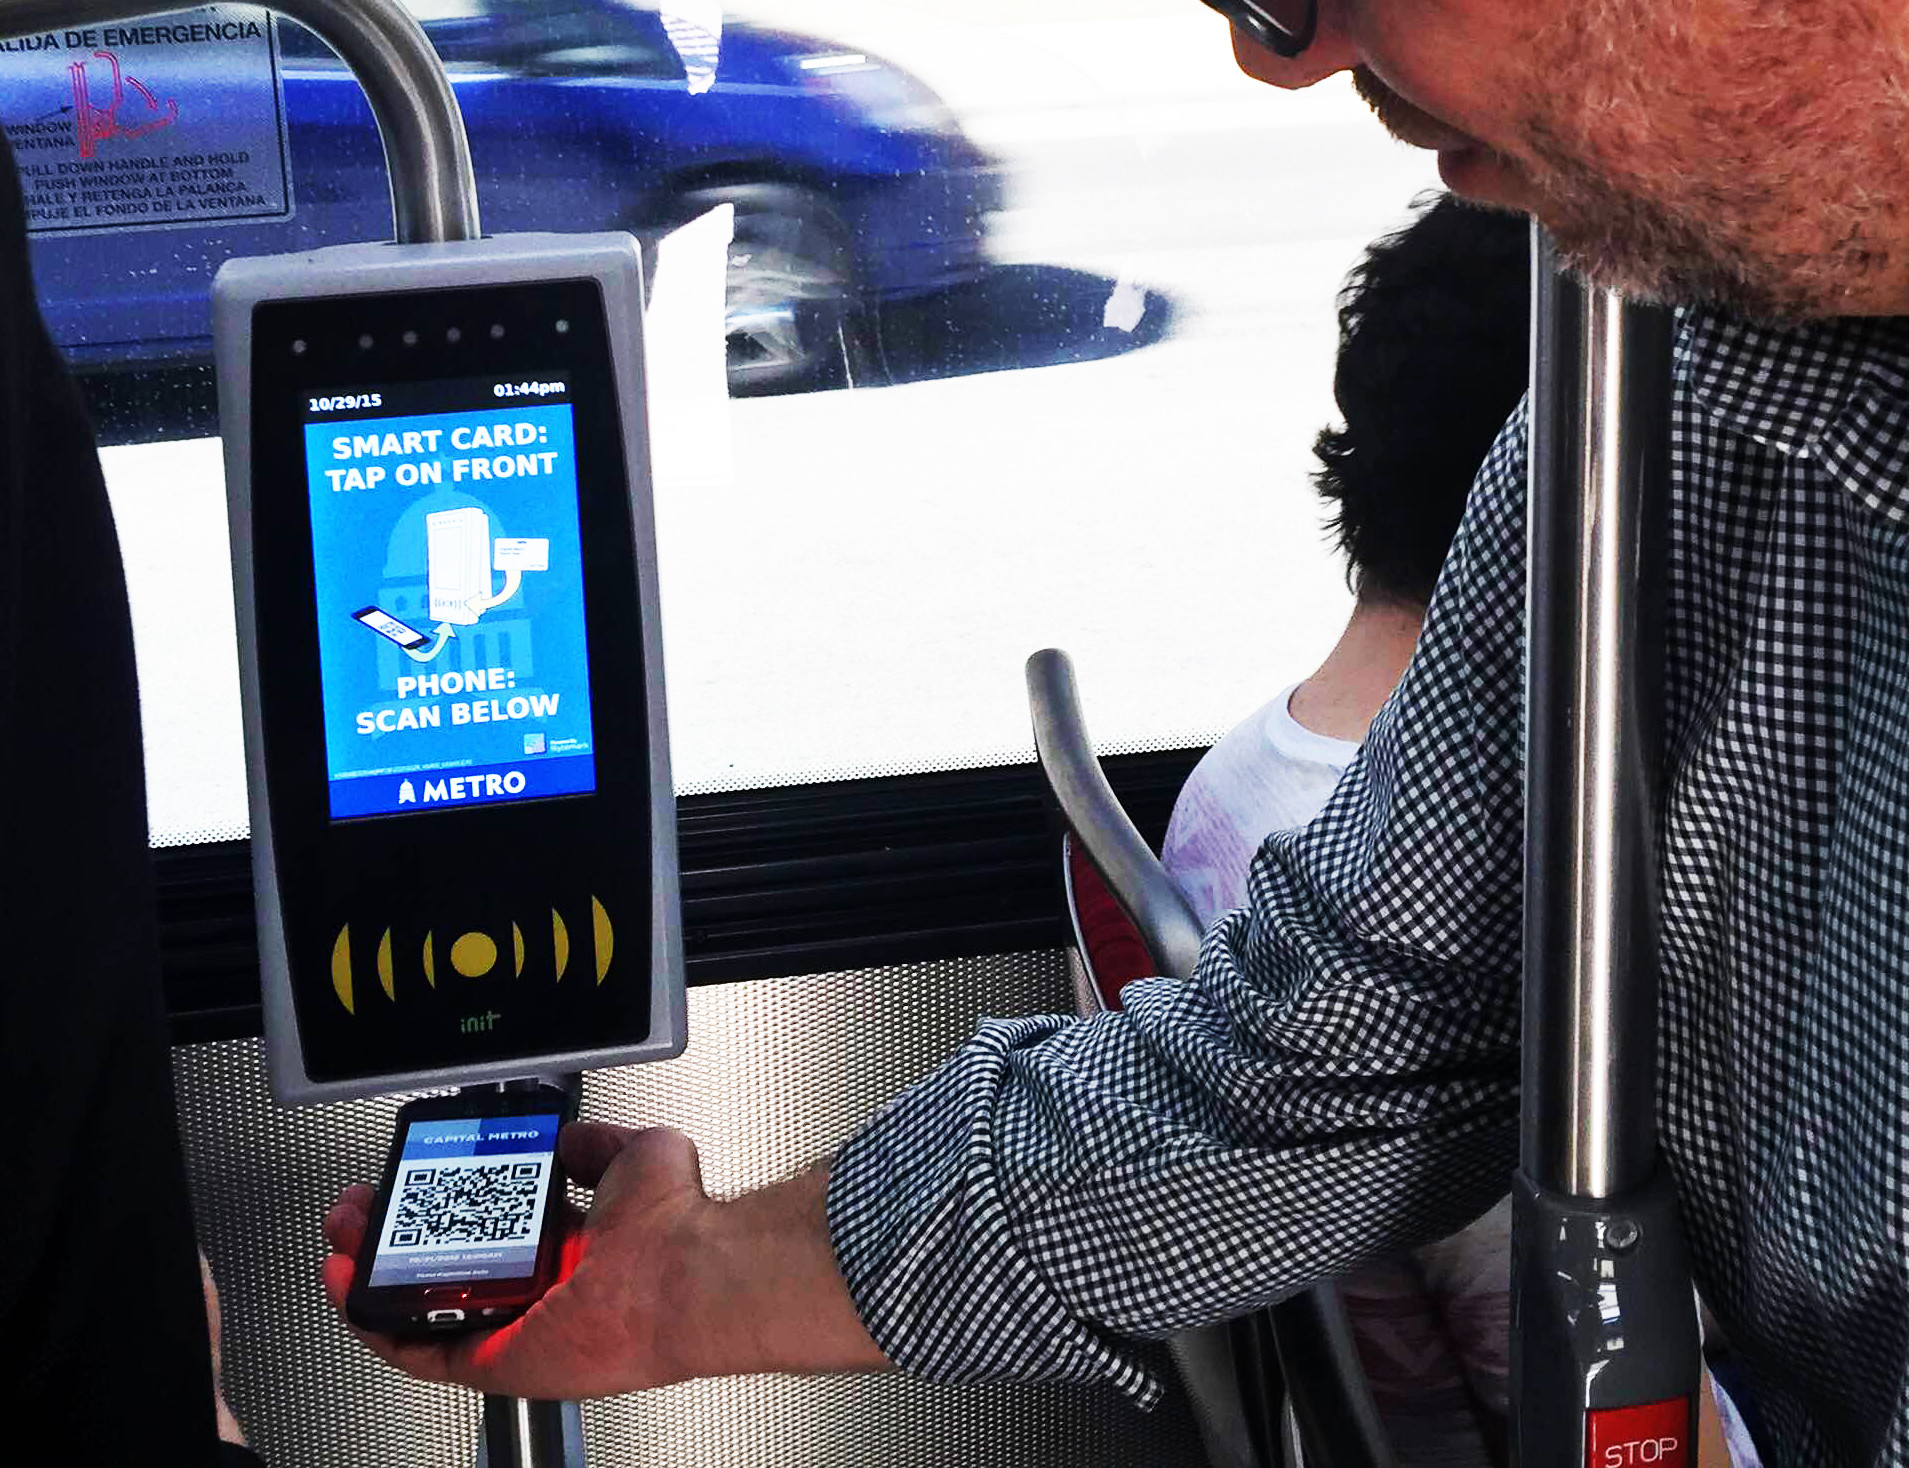 A multi-day mobile ticket is validated on-board by scanning a QR code, Austin (credit: CapMetro)